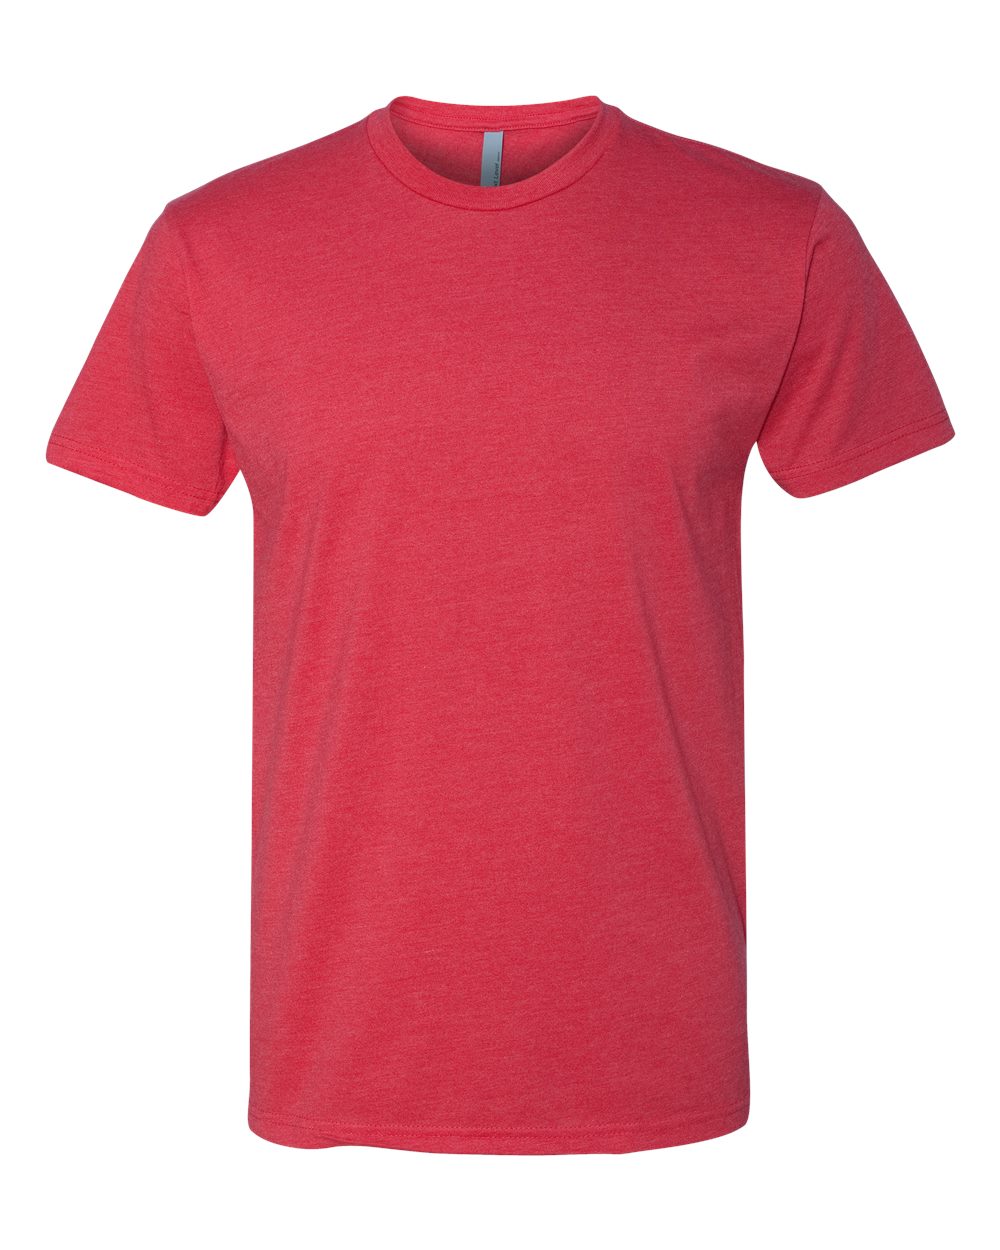 Next Level CVC Tee (6210) in Red